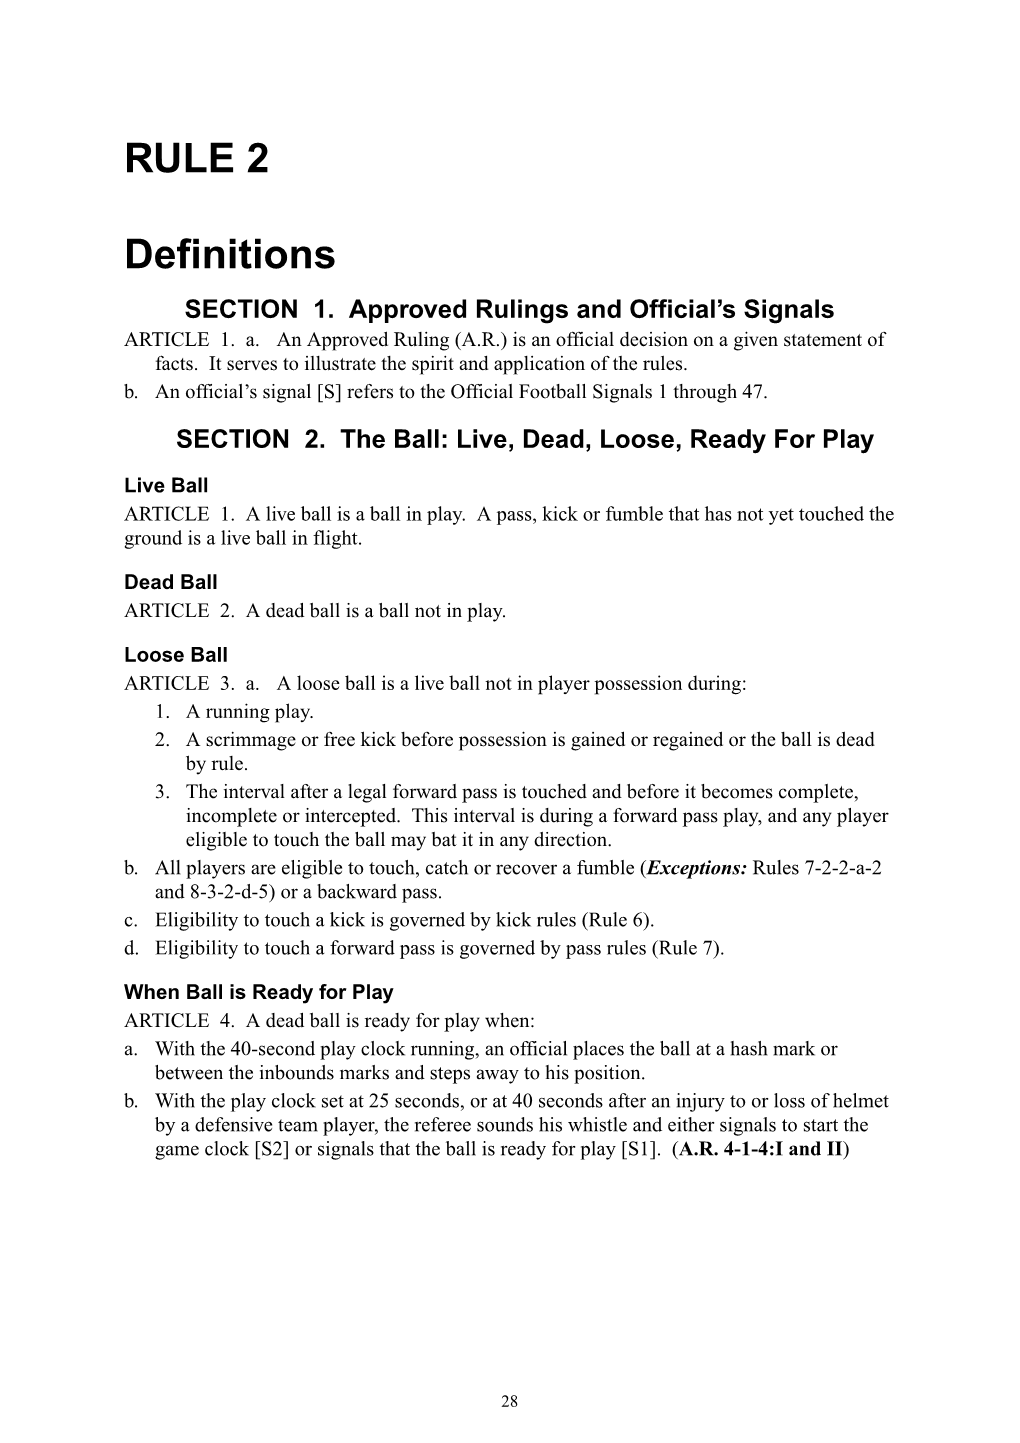 RULE 2 Definitions